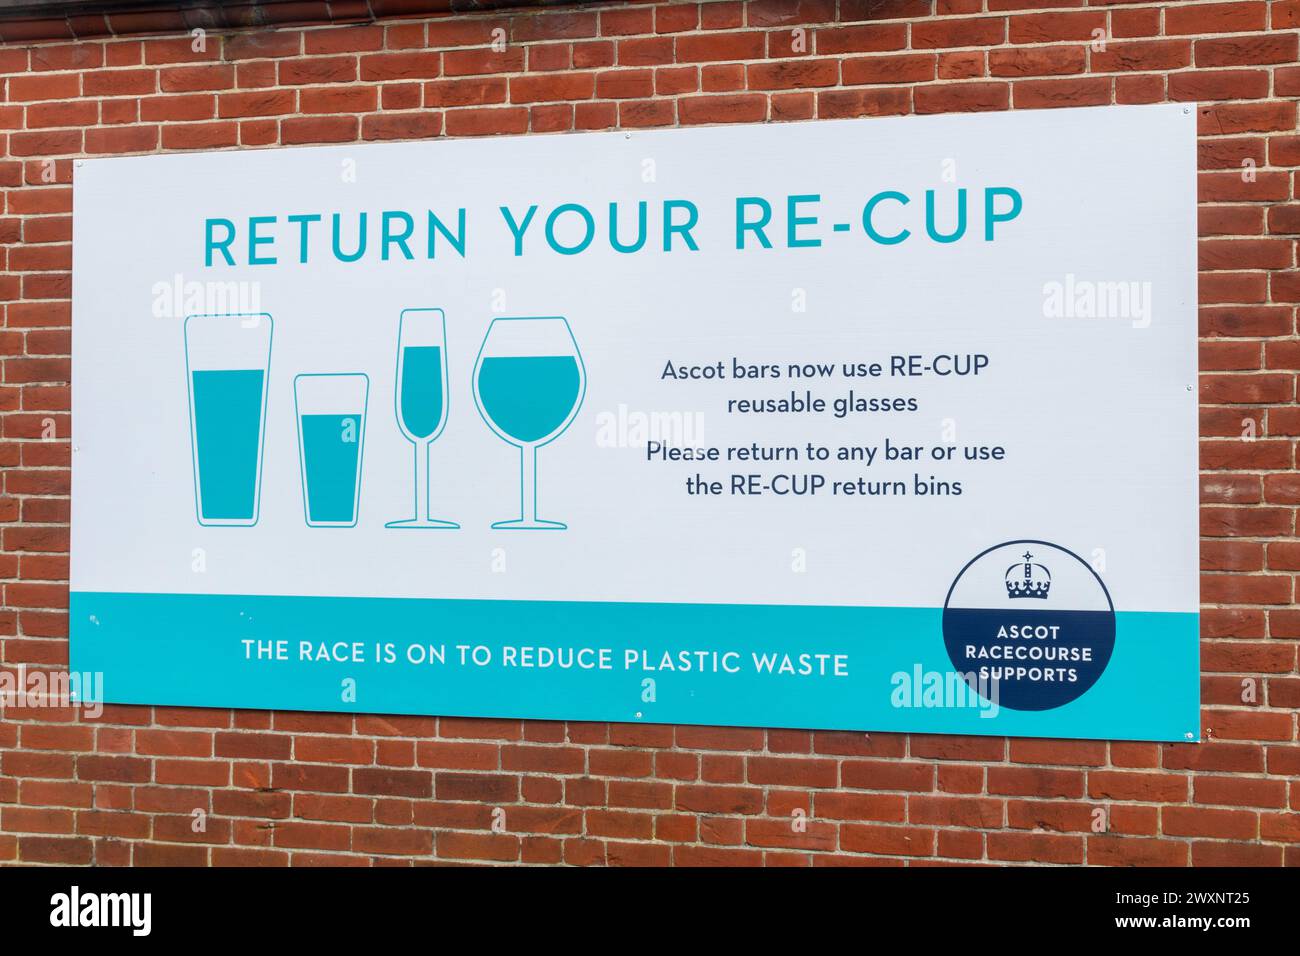 Return your Re-cup sign or poster, asking people to reuse their glasses or return them, Ascot Racecourse, Berkshire, England, UK. Reduce plastic waste Stock Photo